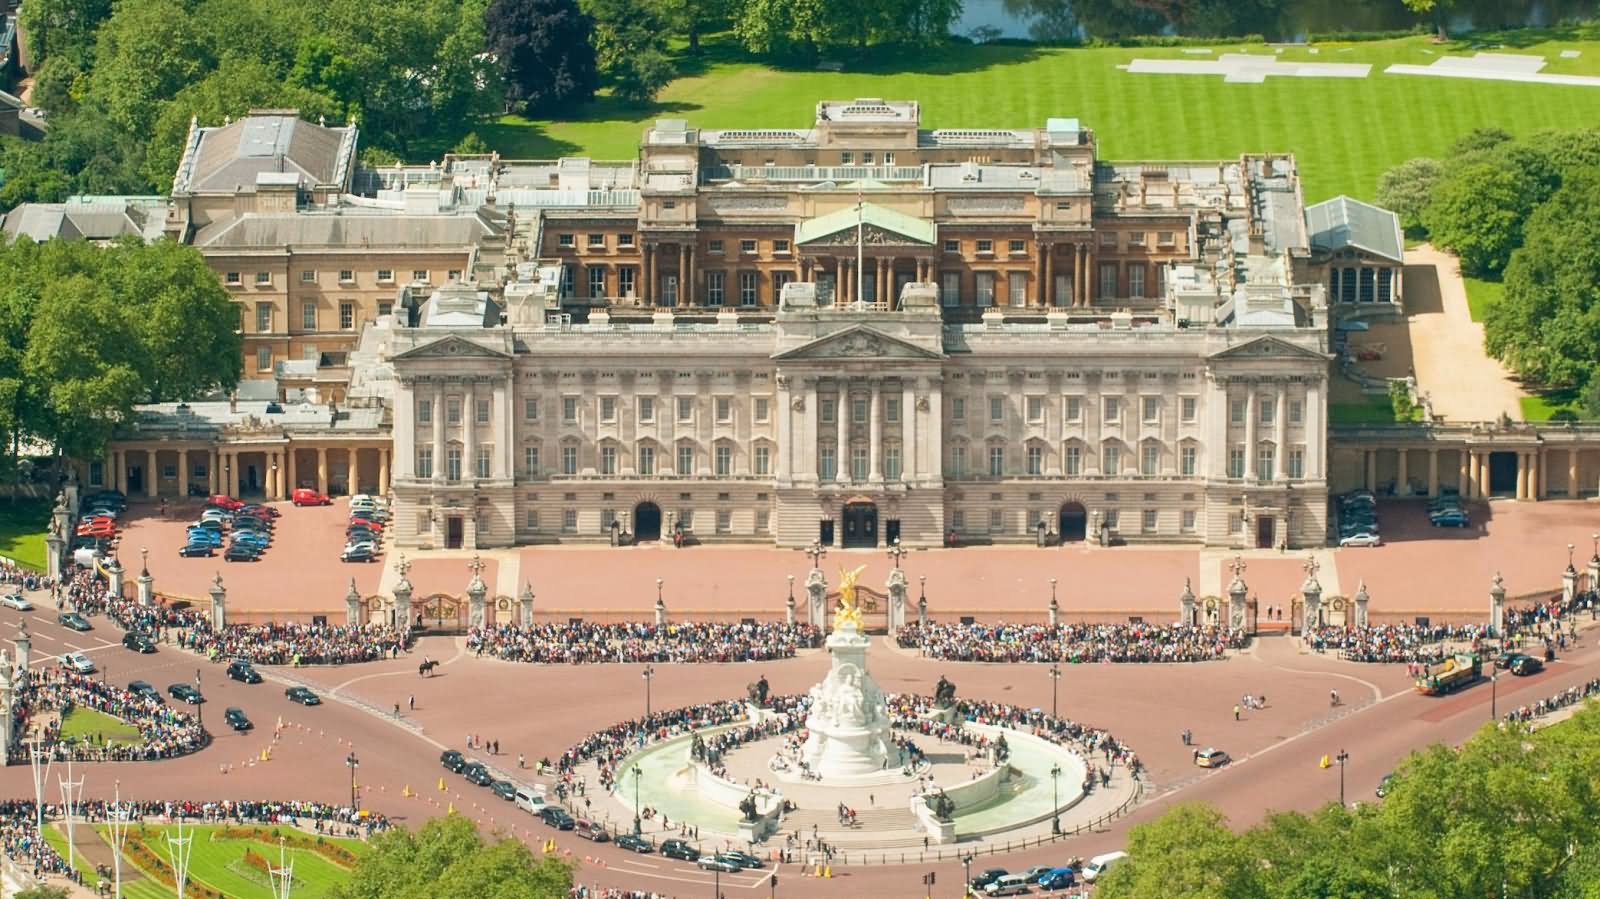 Amazing Aerial View Of The Buckingham Palace